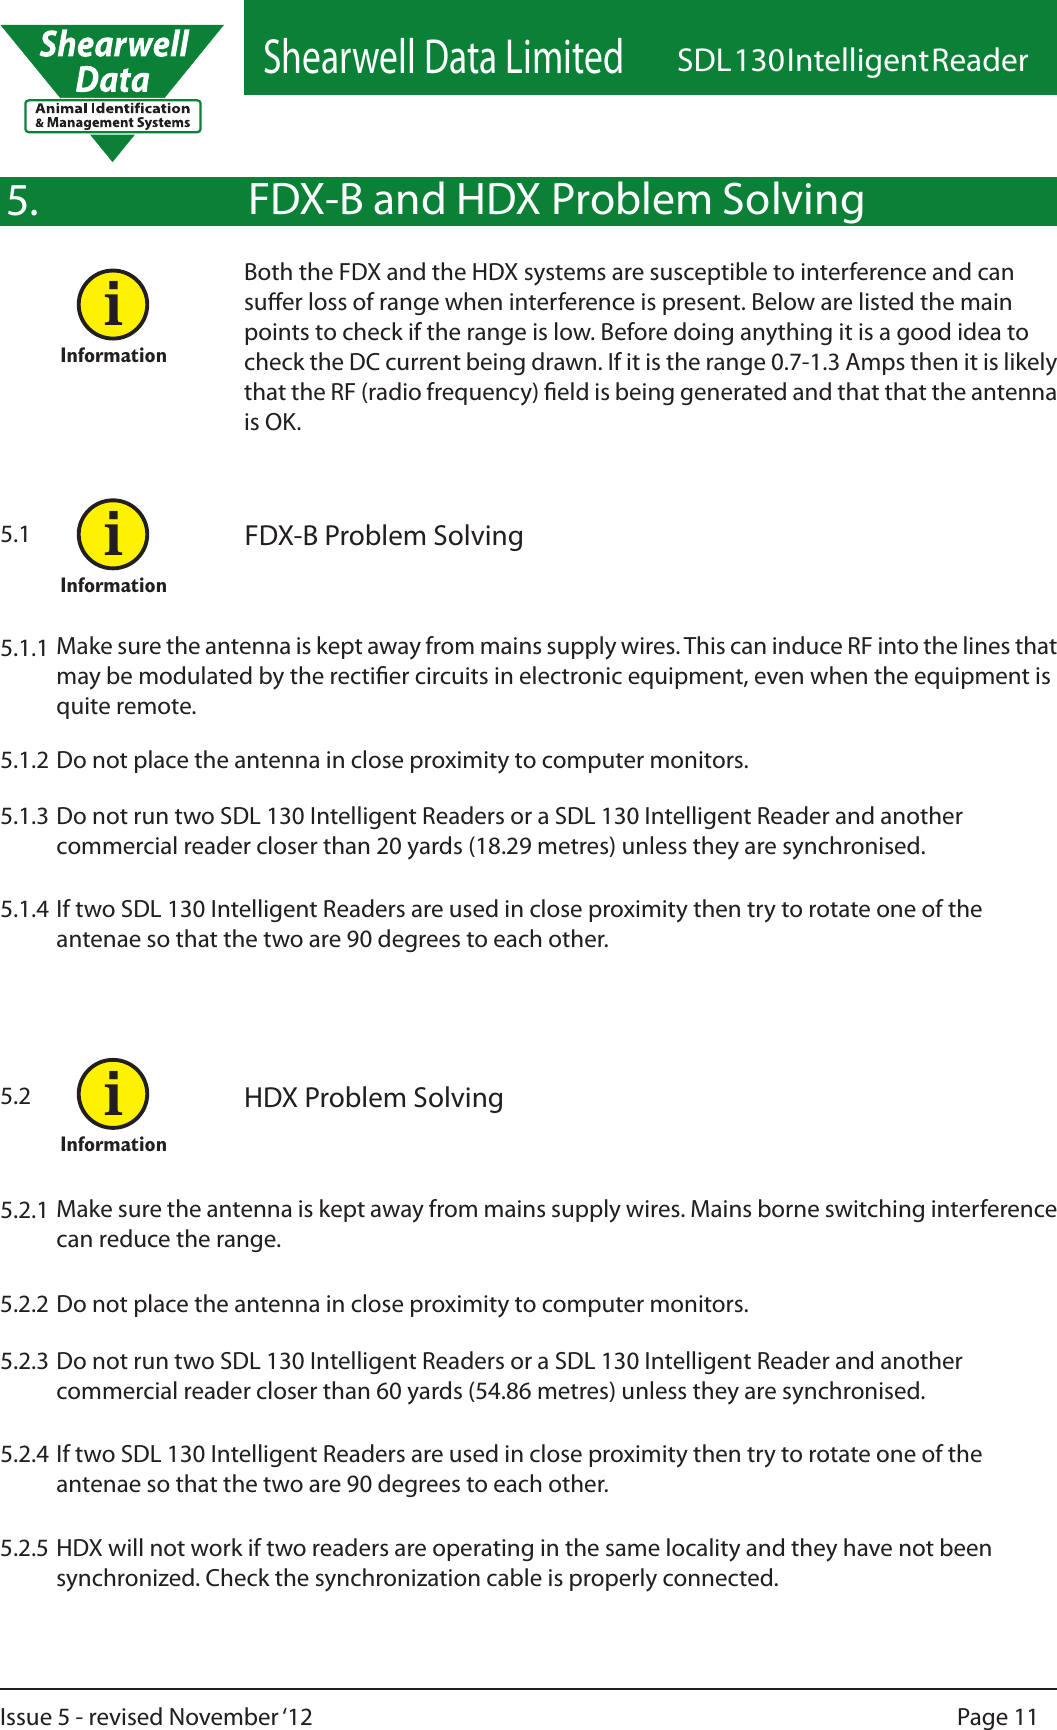 Shearwell Data LimitedSDL 130 Intelligent ReaderPage 11Issue 5 - revised November ‘12FDX-B and HDX Problem SolvingBoth the FDX and the HDX systems are susceptible to interference and can suer loss of range when interference is present. Below are listed the main points to check if the range is low. Before doing anything it is a good idea to check the DC current being drawn. If it is the range 0.7-1.3 Amps then it is likely that the RF (radio frequency) eld is being generated and that that the antenna is OK.FDX-B Problem SolvingMake sure the antenna is kept away from mains supply wires. This can induce RF into the lines that may be modulated by the rectier circuits in electronic equipment, even when the equipment is quite remote.5.1.1Do not place the antenna in close proximity to computer monitors.5.1.2Do not run two SDL 130 Intelligent Readers or a SDL 130 Intelligent Reader and another commercial reader closer than 20 yards (18.29 metres) unless they are synchronised.5.1.3If two SDL 130 Intelligent Readers are used in close proximity then try to rotate one of the antenae so that the two are 90 degrees to each other.5.1.4HDX Problem SolvingMake sure the antenna is kept away from mains supply wires. Mains borne switching interference can reduce the range.5.2.1Do not place the antenna in close proximity to computer monitors.5.2.2Do not run two SDL 130 Intelligent Readers or a SDL 130 Intelligent Reader and another commercial reader closer than 60 yards (54.86 metres) unless they are synchronised.5.2.3If two SDL 130 Intelligent Readers are used in close proximity then try to rotate one of the antenae so that the two are 90 degrees to each other.5.2.4HDX will not work if two readers are operating in the same locality and they have not been synchronized. Check the synchronization cable is properly connected.5.2.55.15.25.InformationiInformationiInformationi